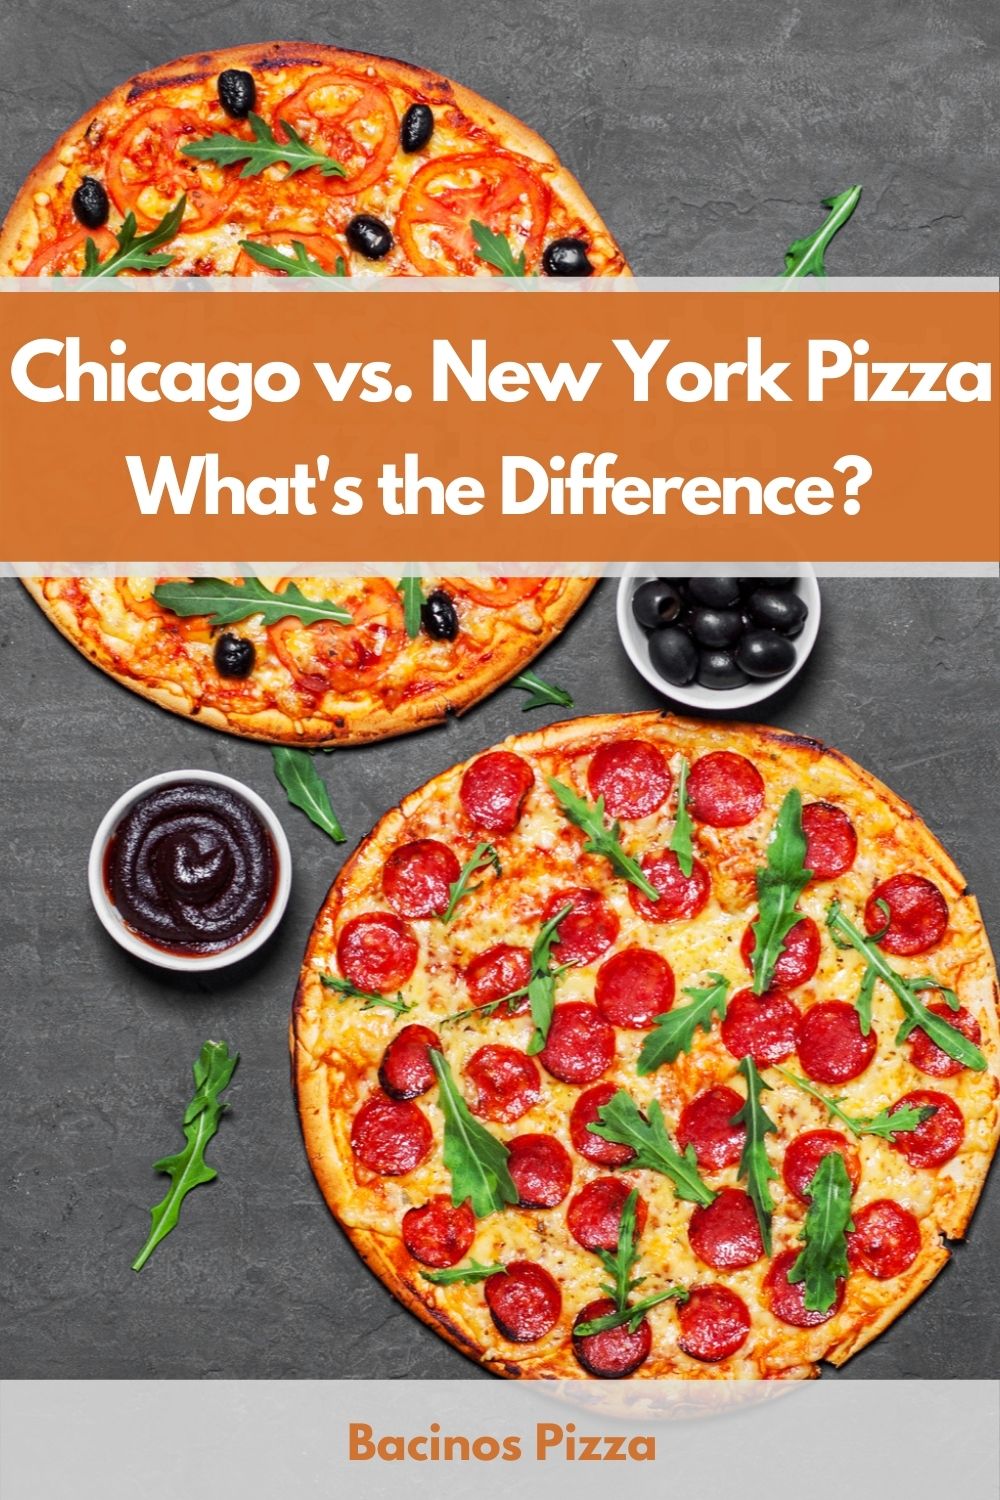 Chicago vs. New York Pizza What's the Difference pin 2